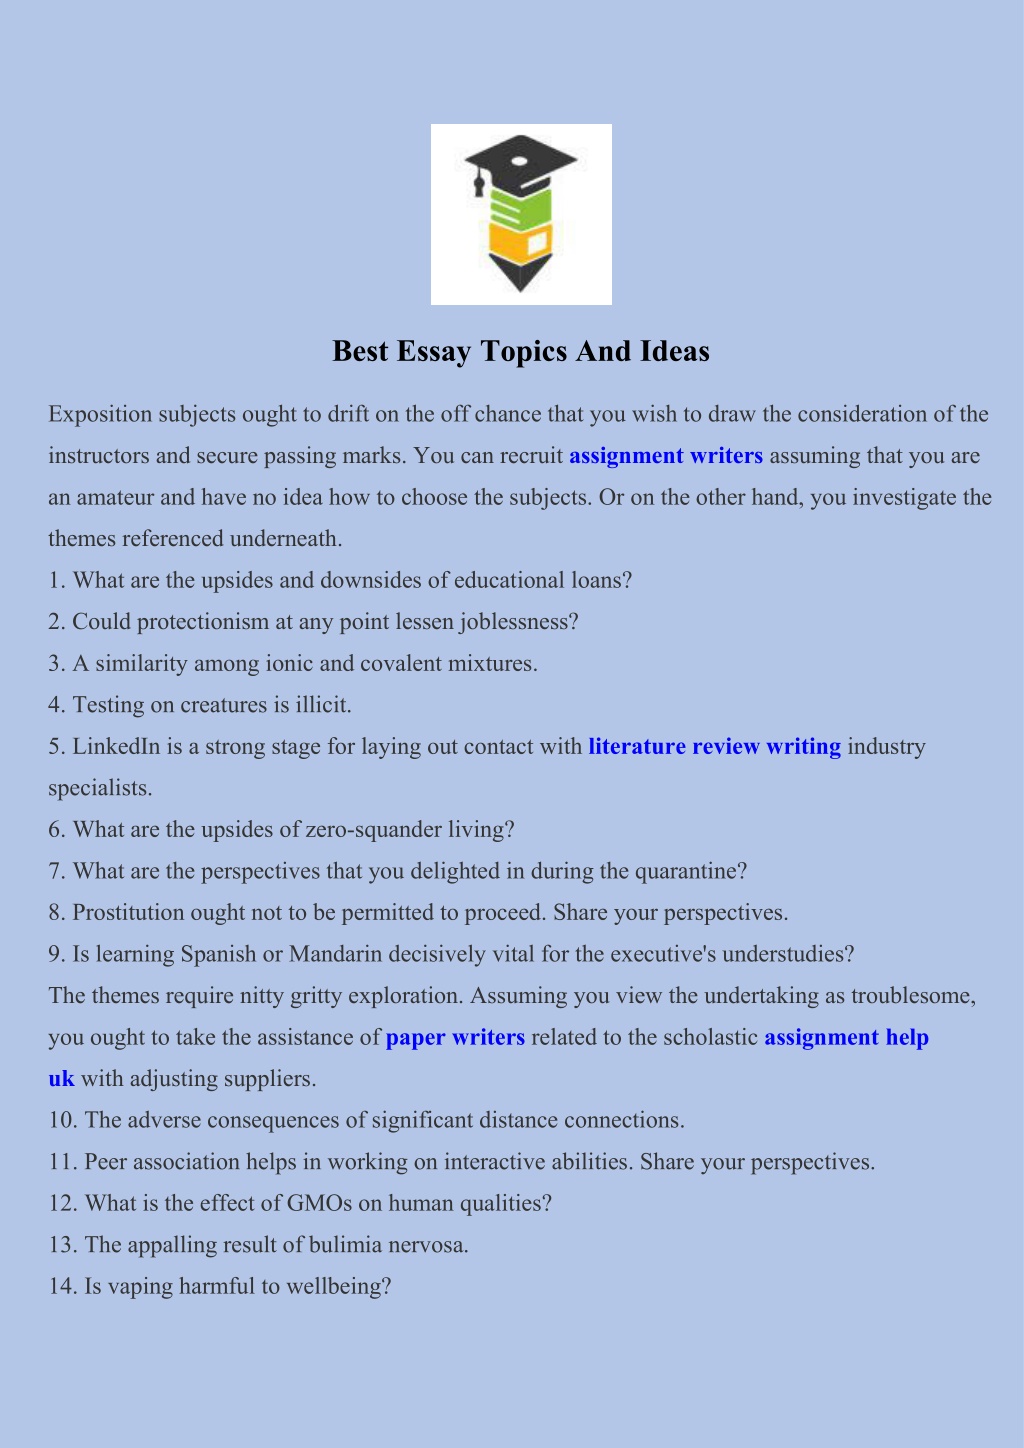 what are the best essay topics